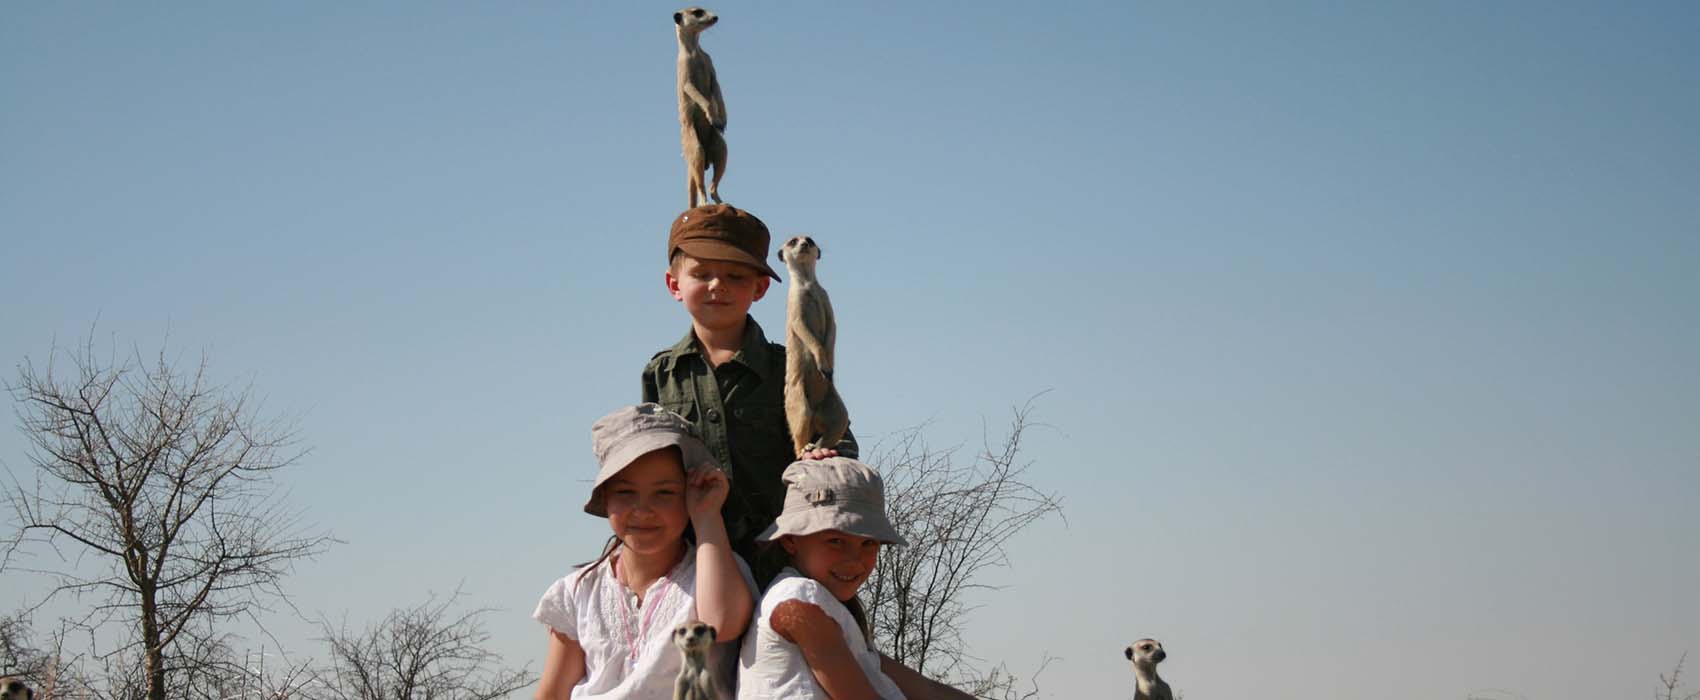 safaris for families in africa